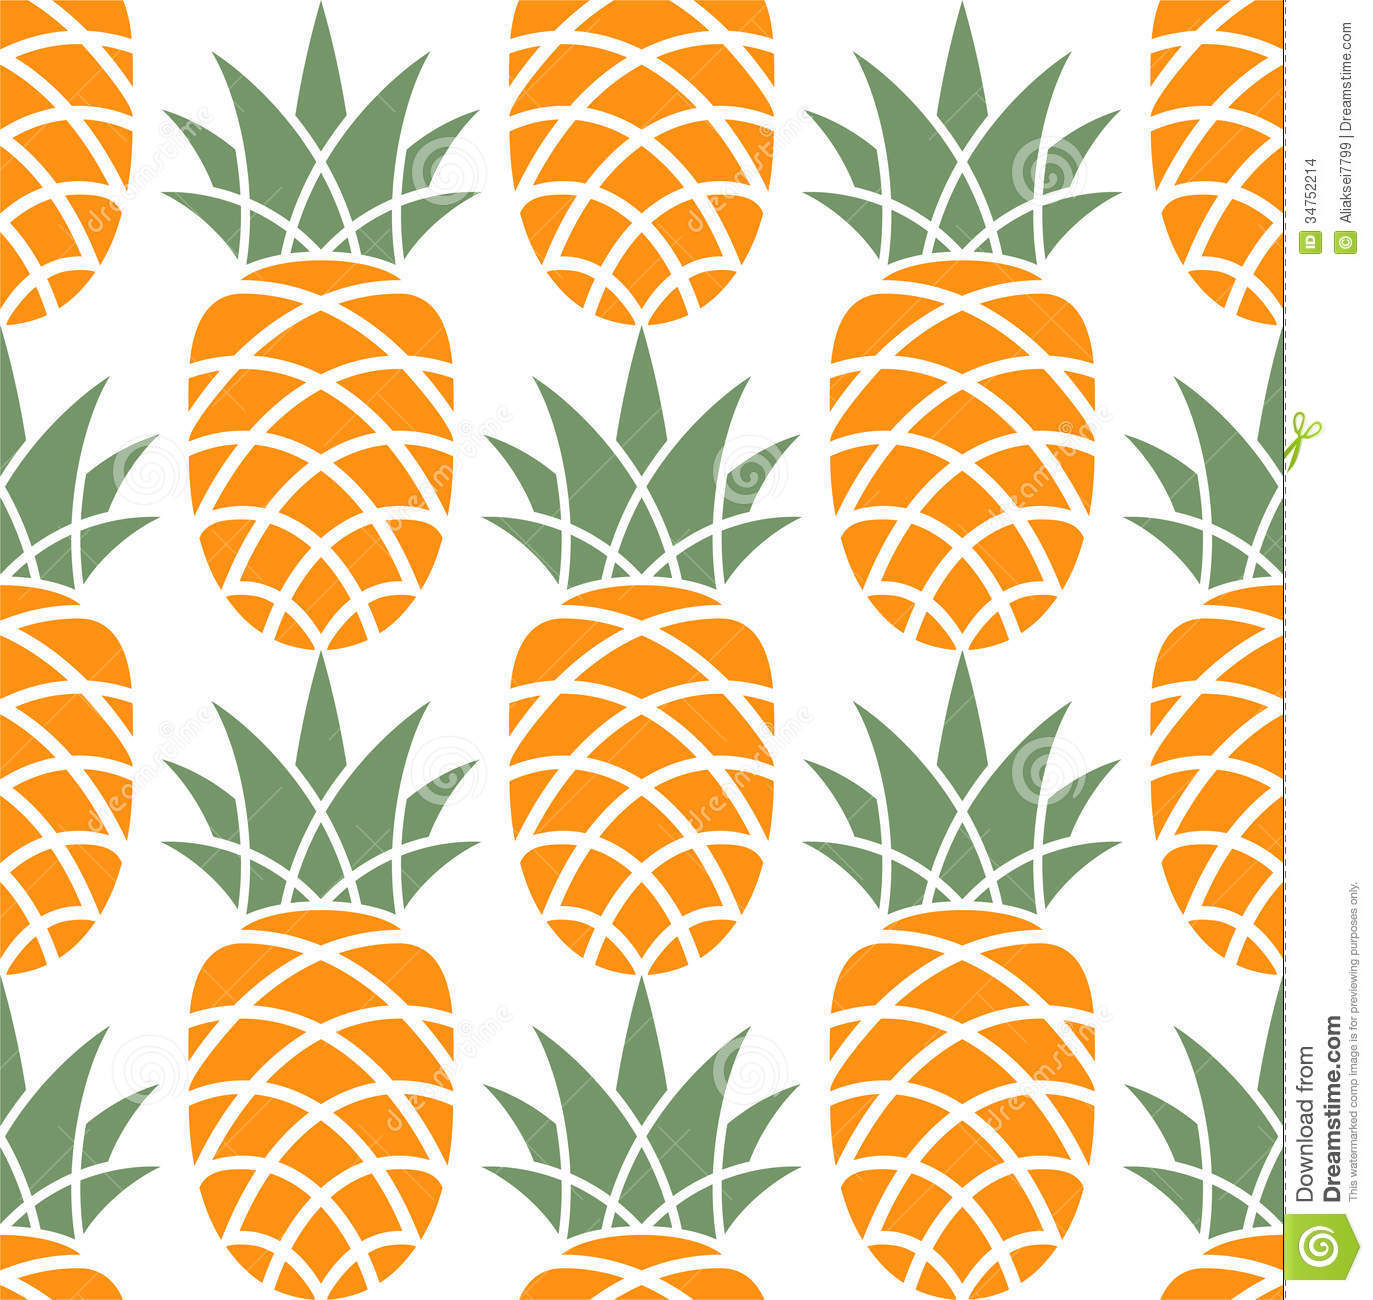 Tumblr Backgrounds Pineapples backgrounds pineapples